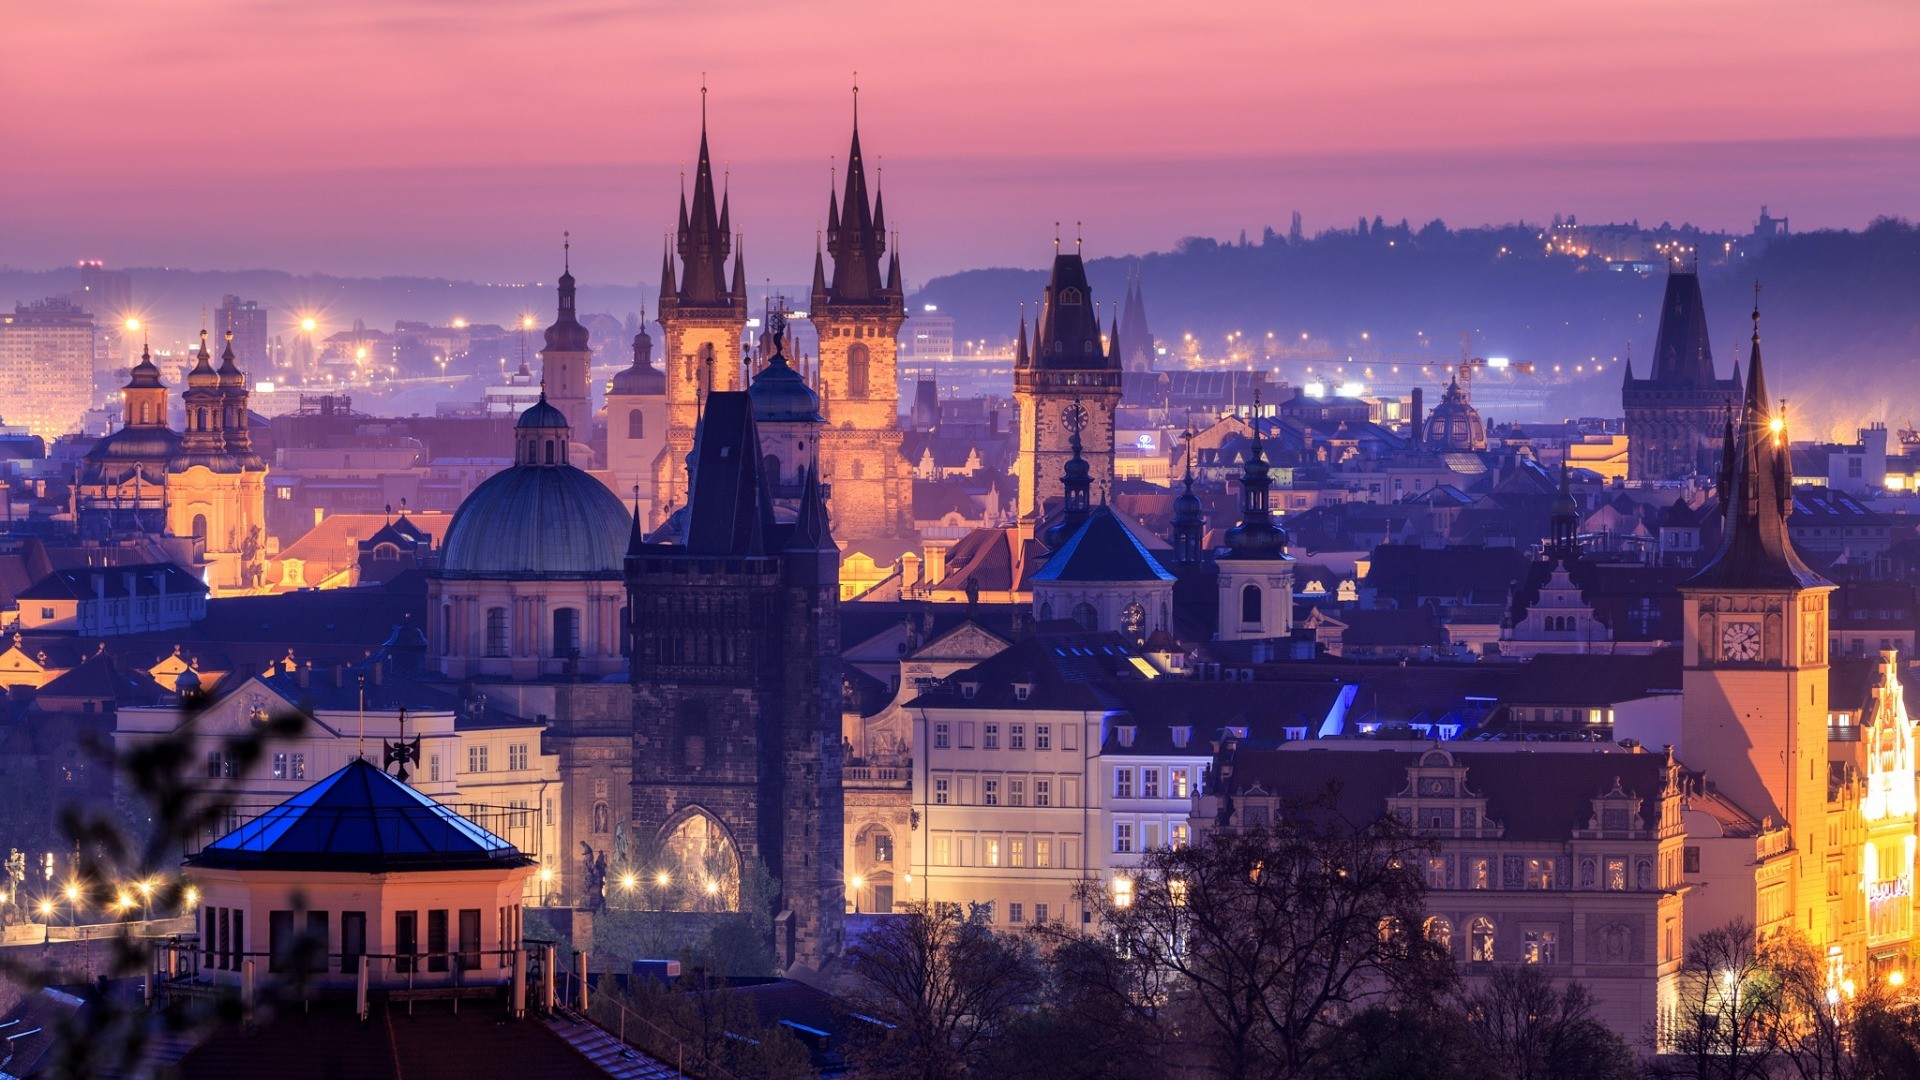 General 1920x1080 architecture building evening Czech Republic Prague cathedral church tower sunset lights old building ancient city cityscape Church of Our Lady before Týn